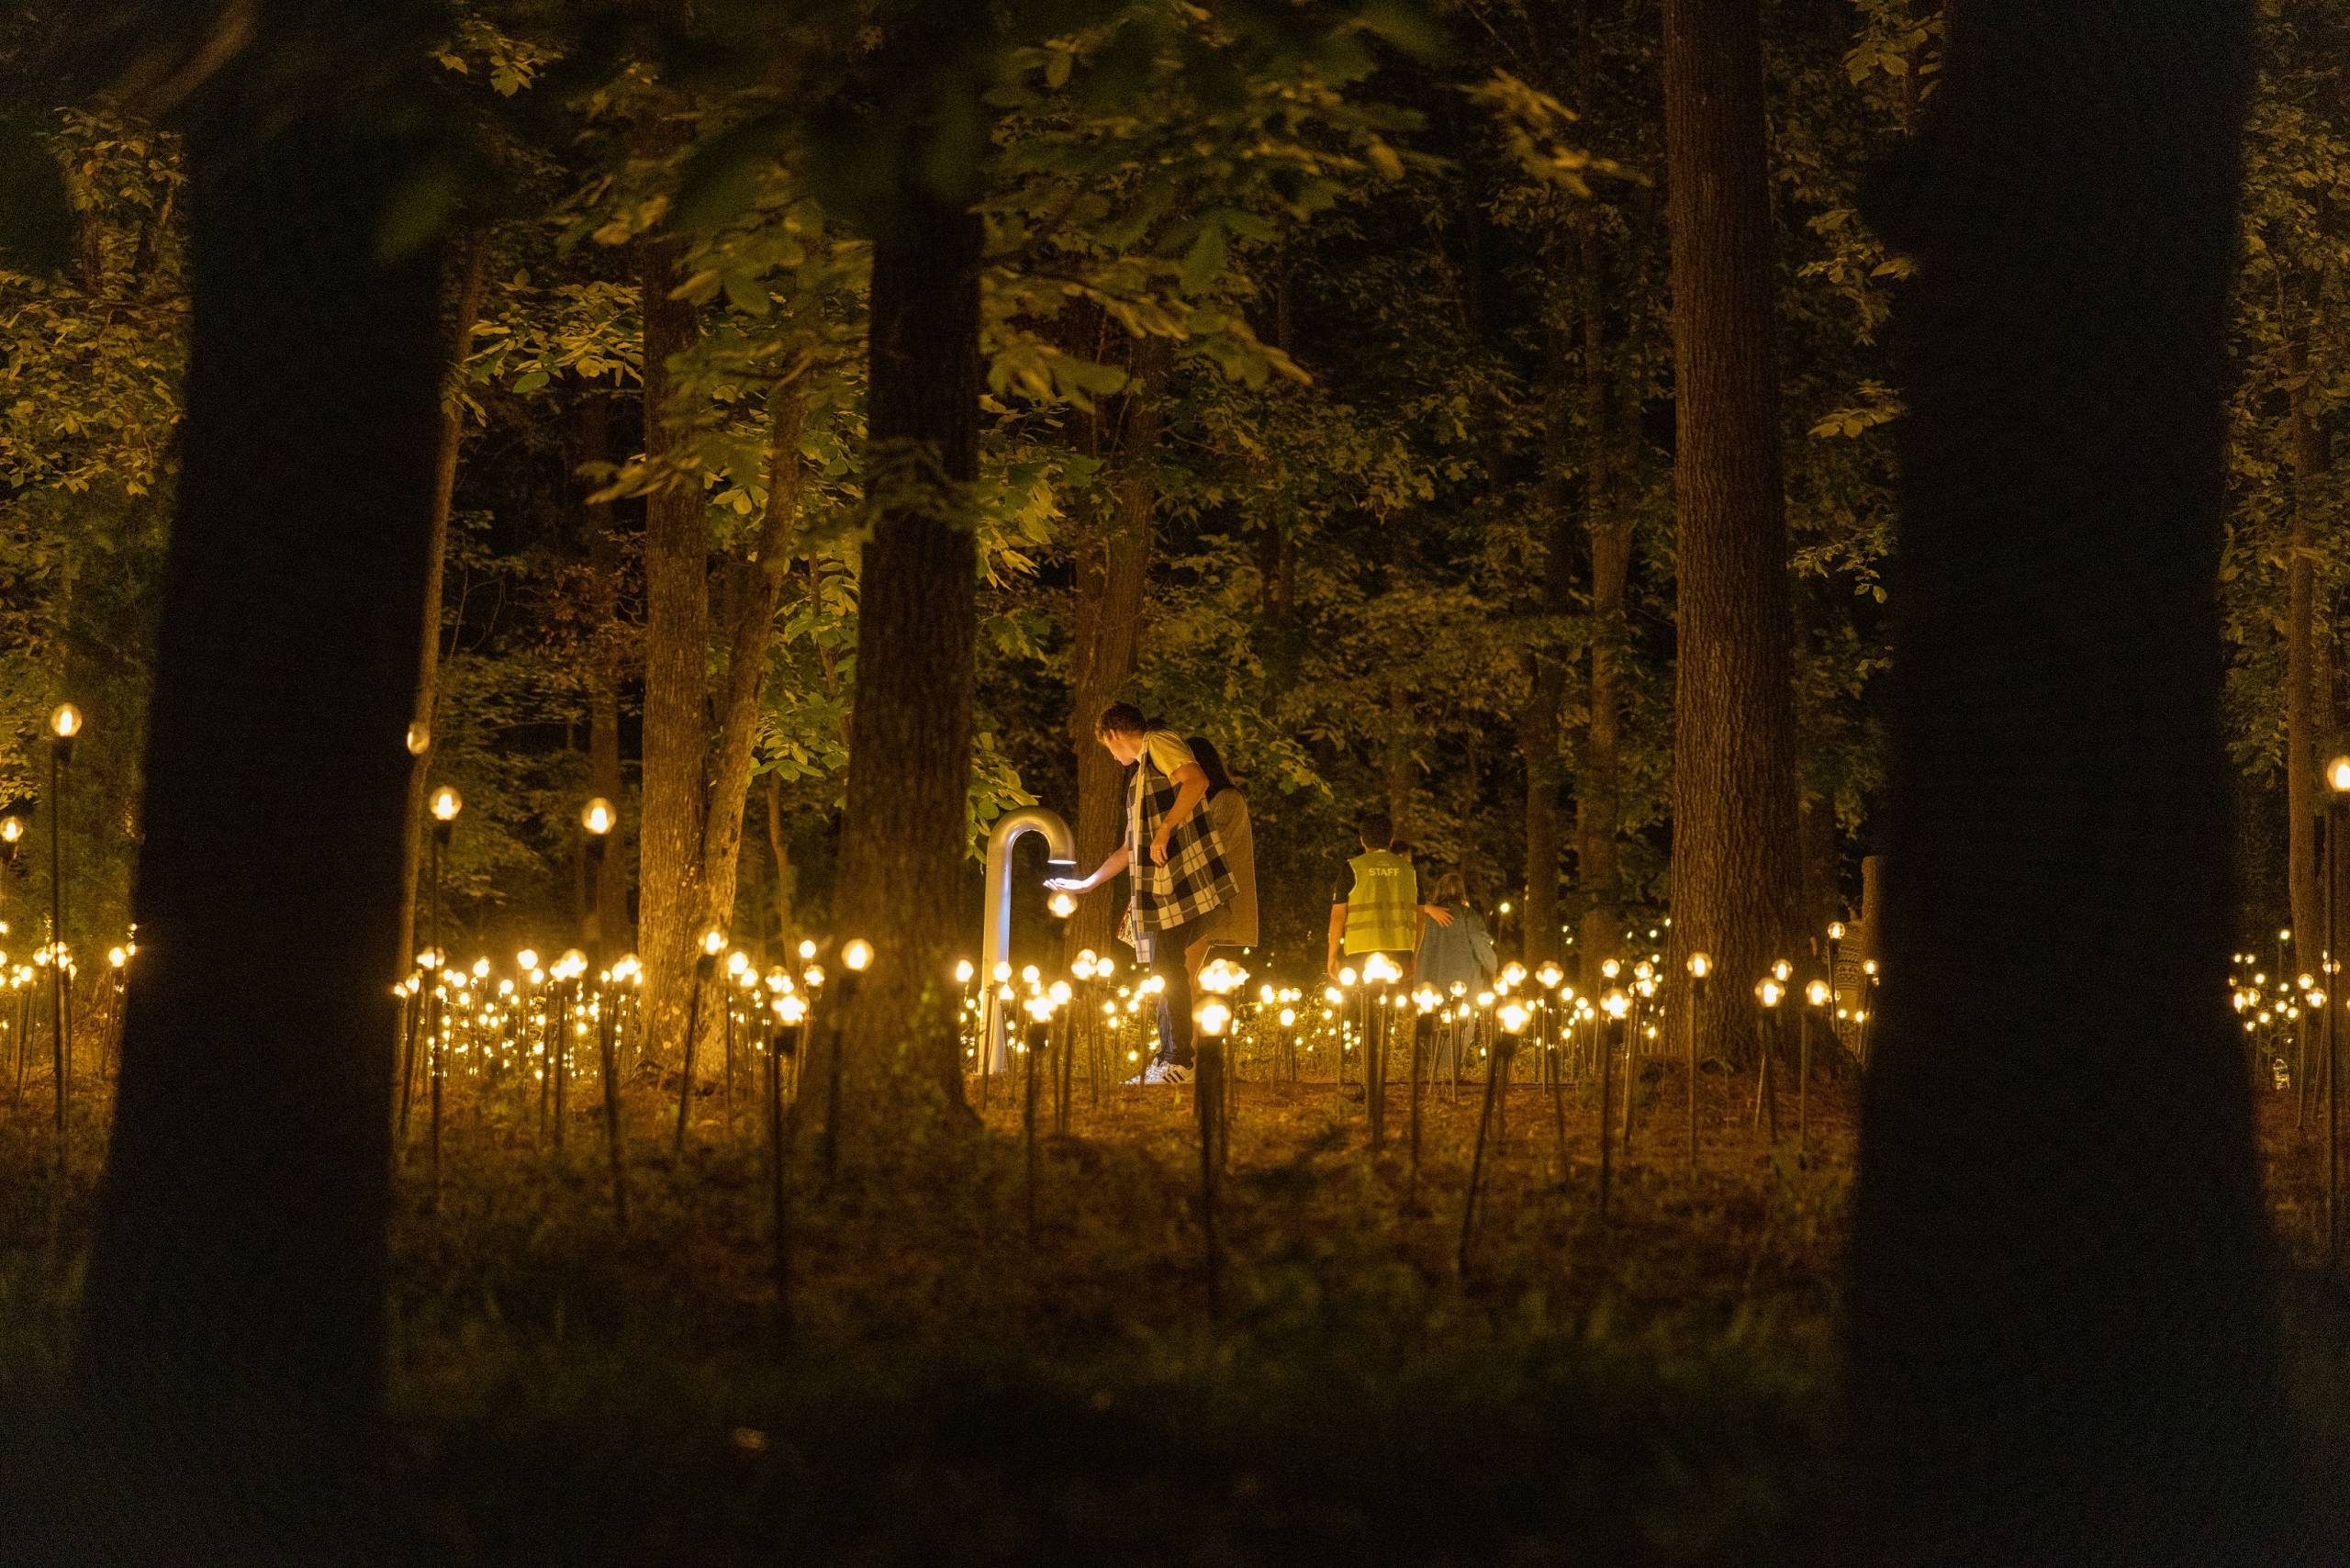 A man puts his hand under a cane-shaped kiosk surrounded by a field of lights in the middle of the forest at night